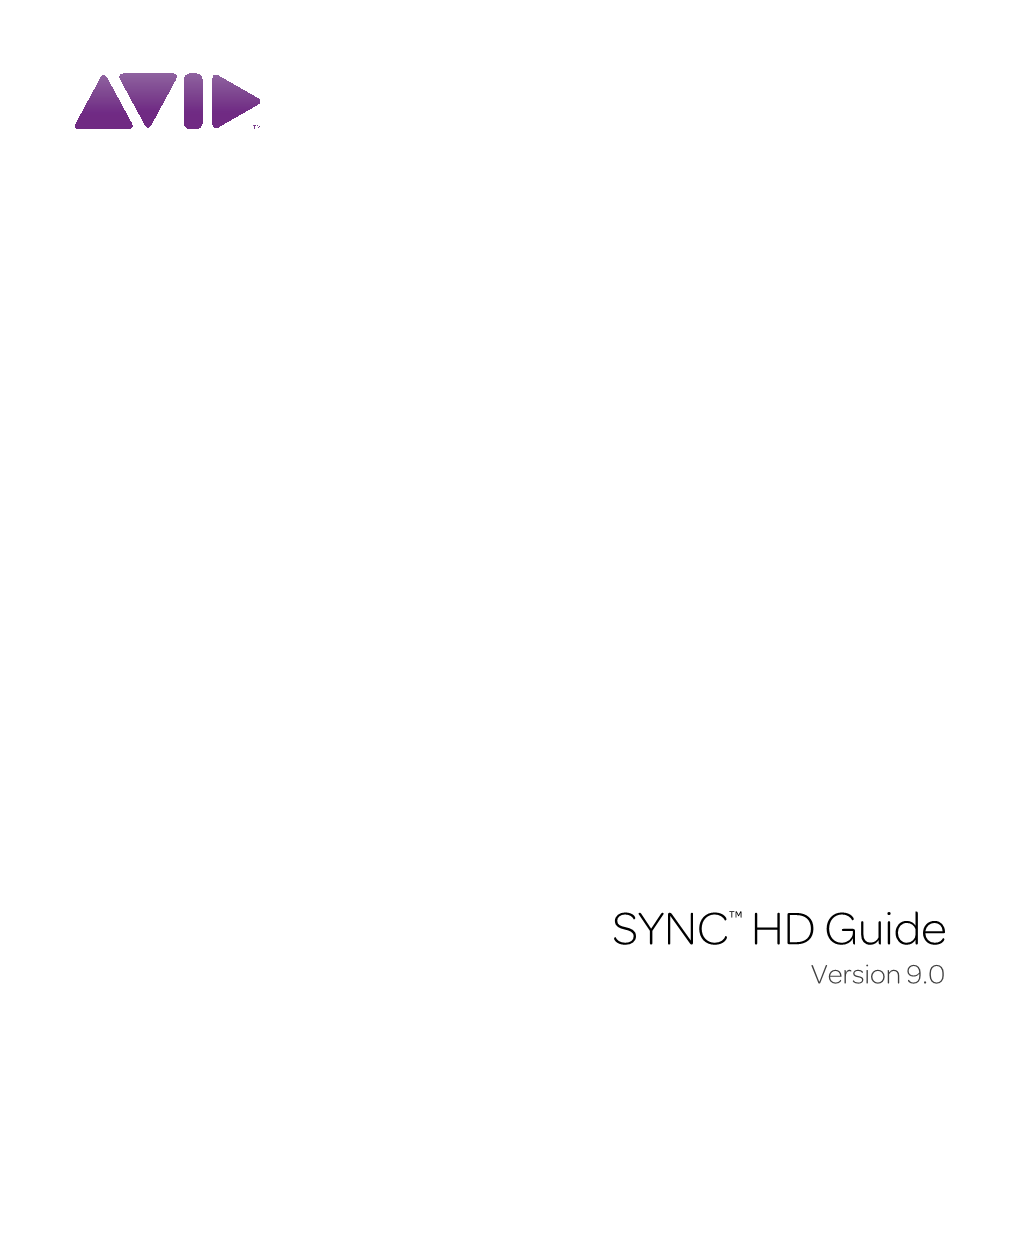 SYNC HD Guide Chapter 1 Introduction